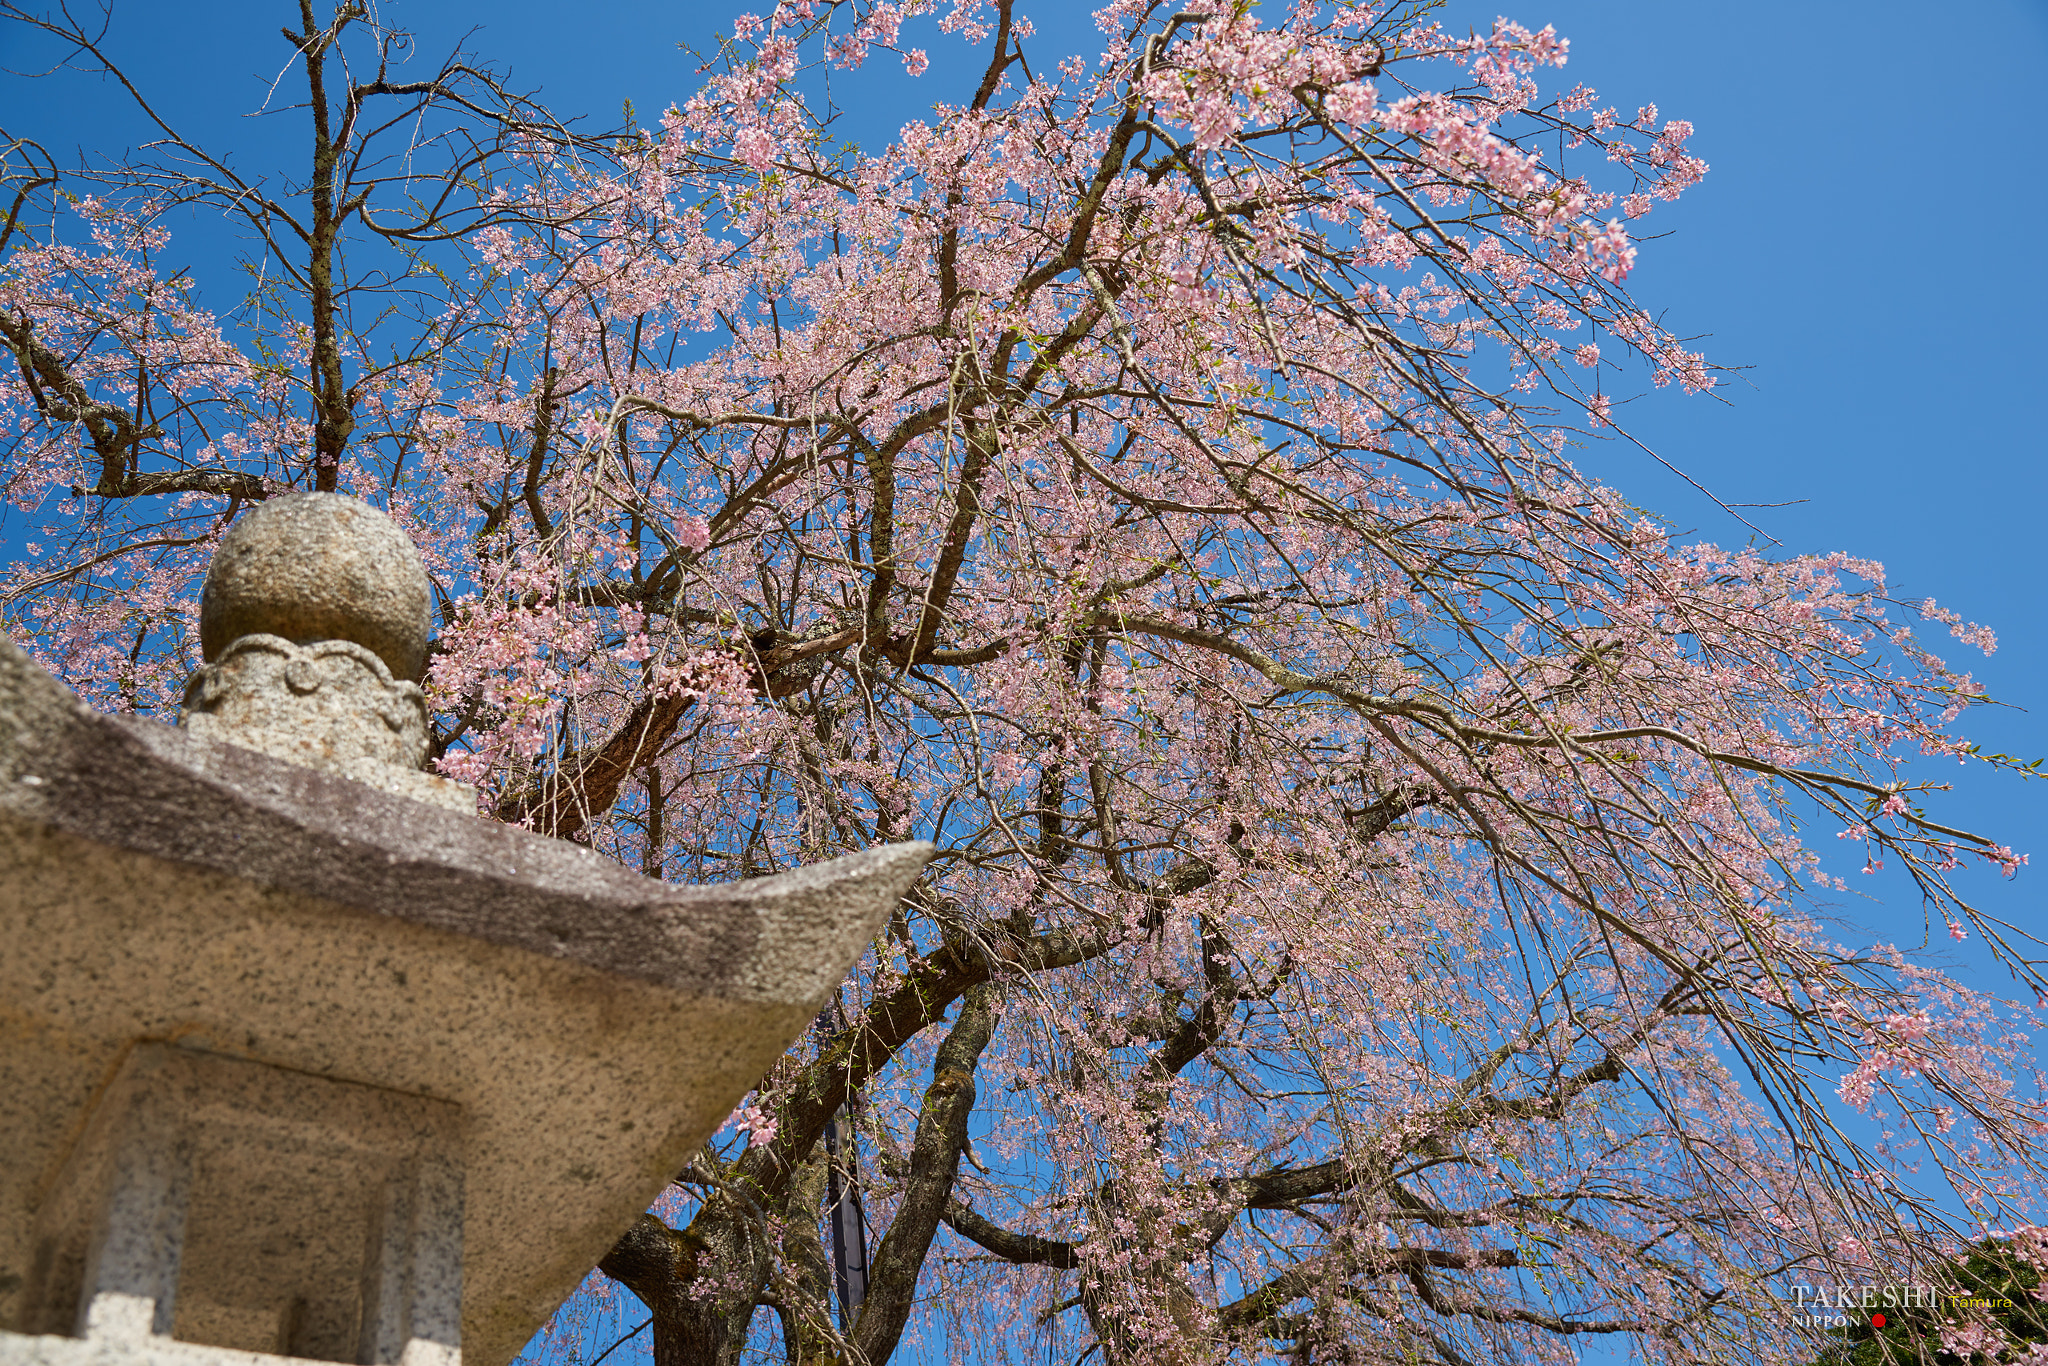 Nikon D810 sample photo. Stone lantern and weeping cherry photography